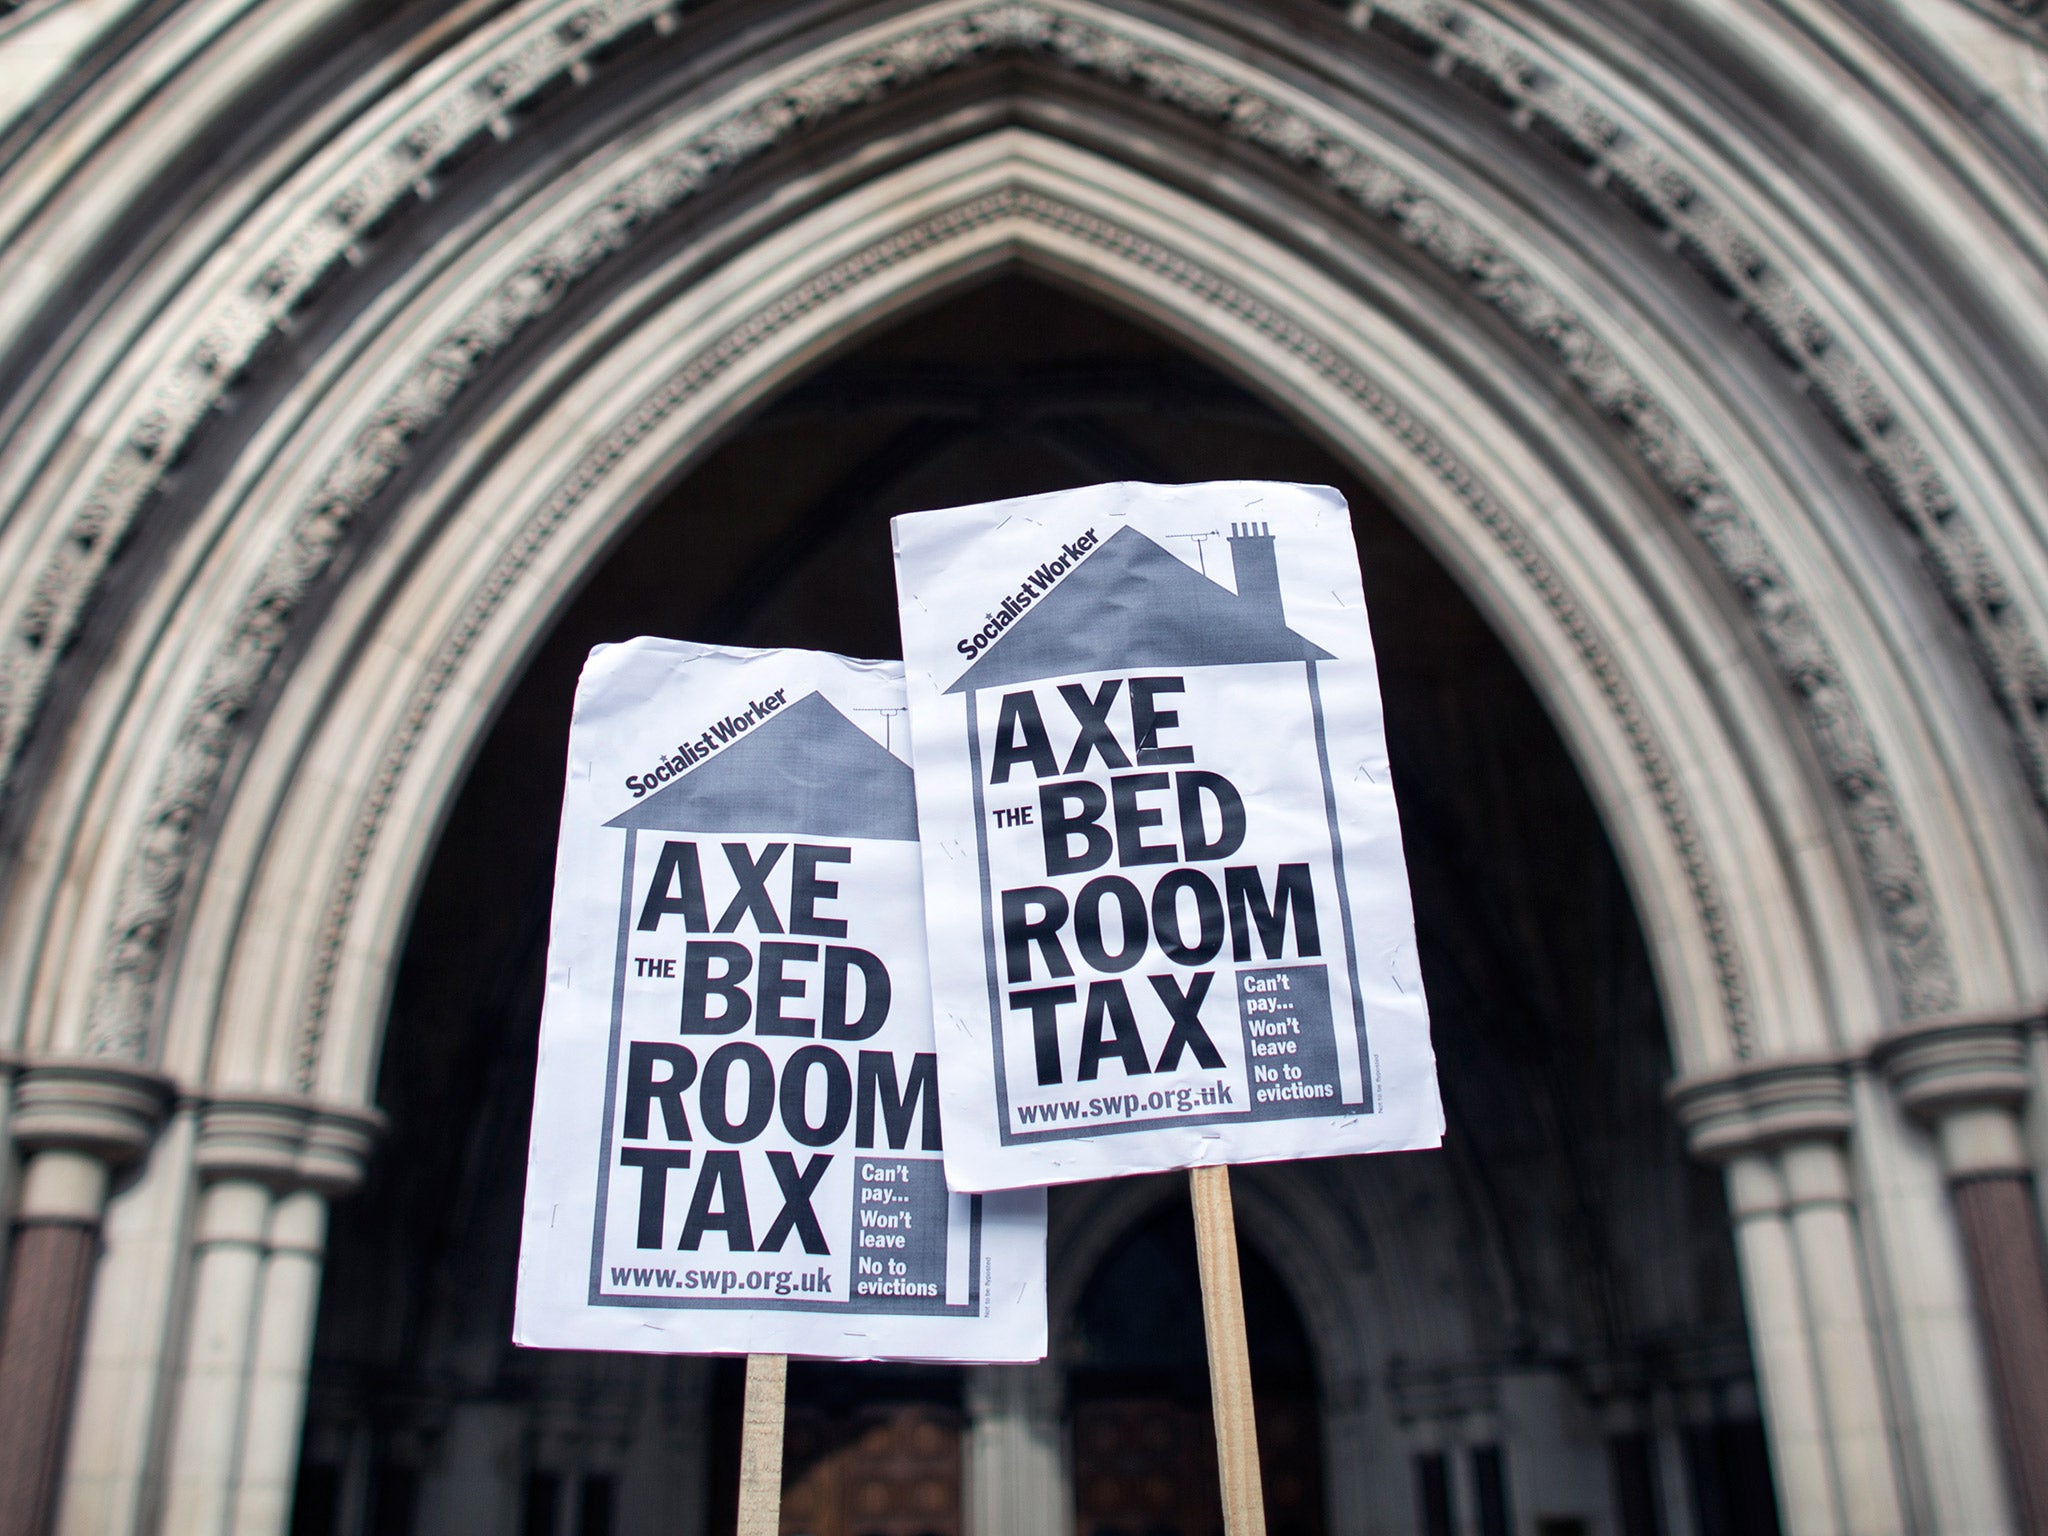 Campaigners demonstrating against the Bedroom Tax outside the Royal Courts of Justice